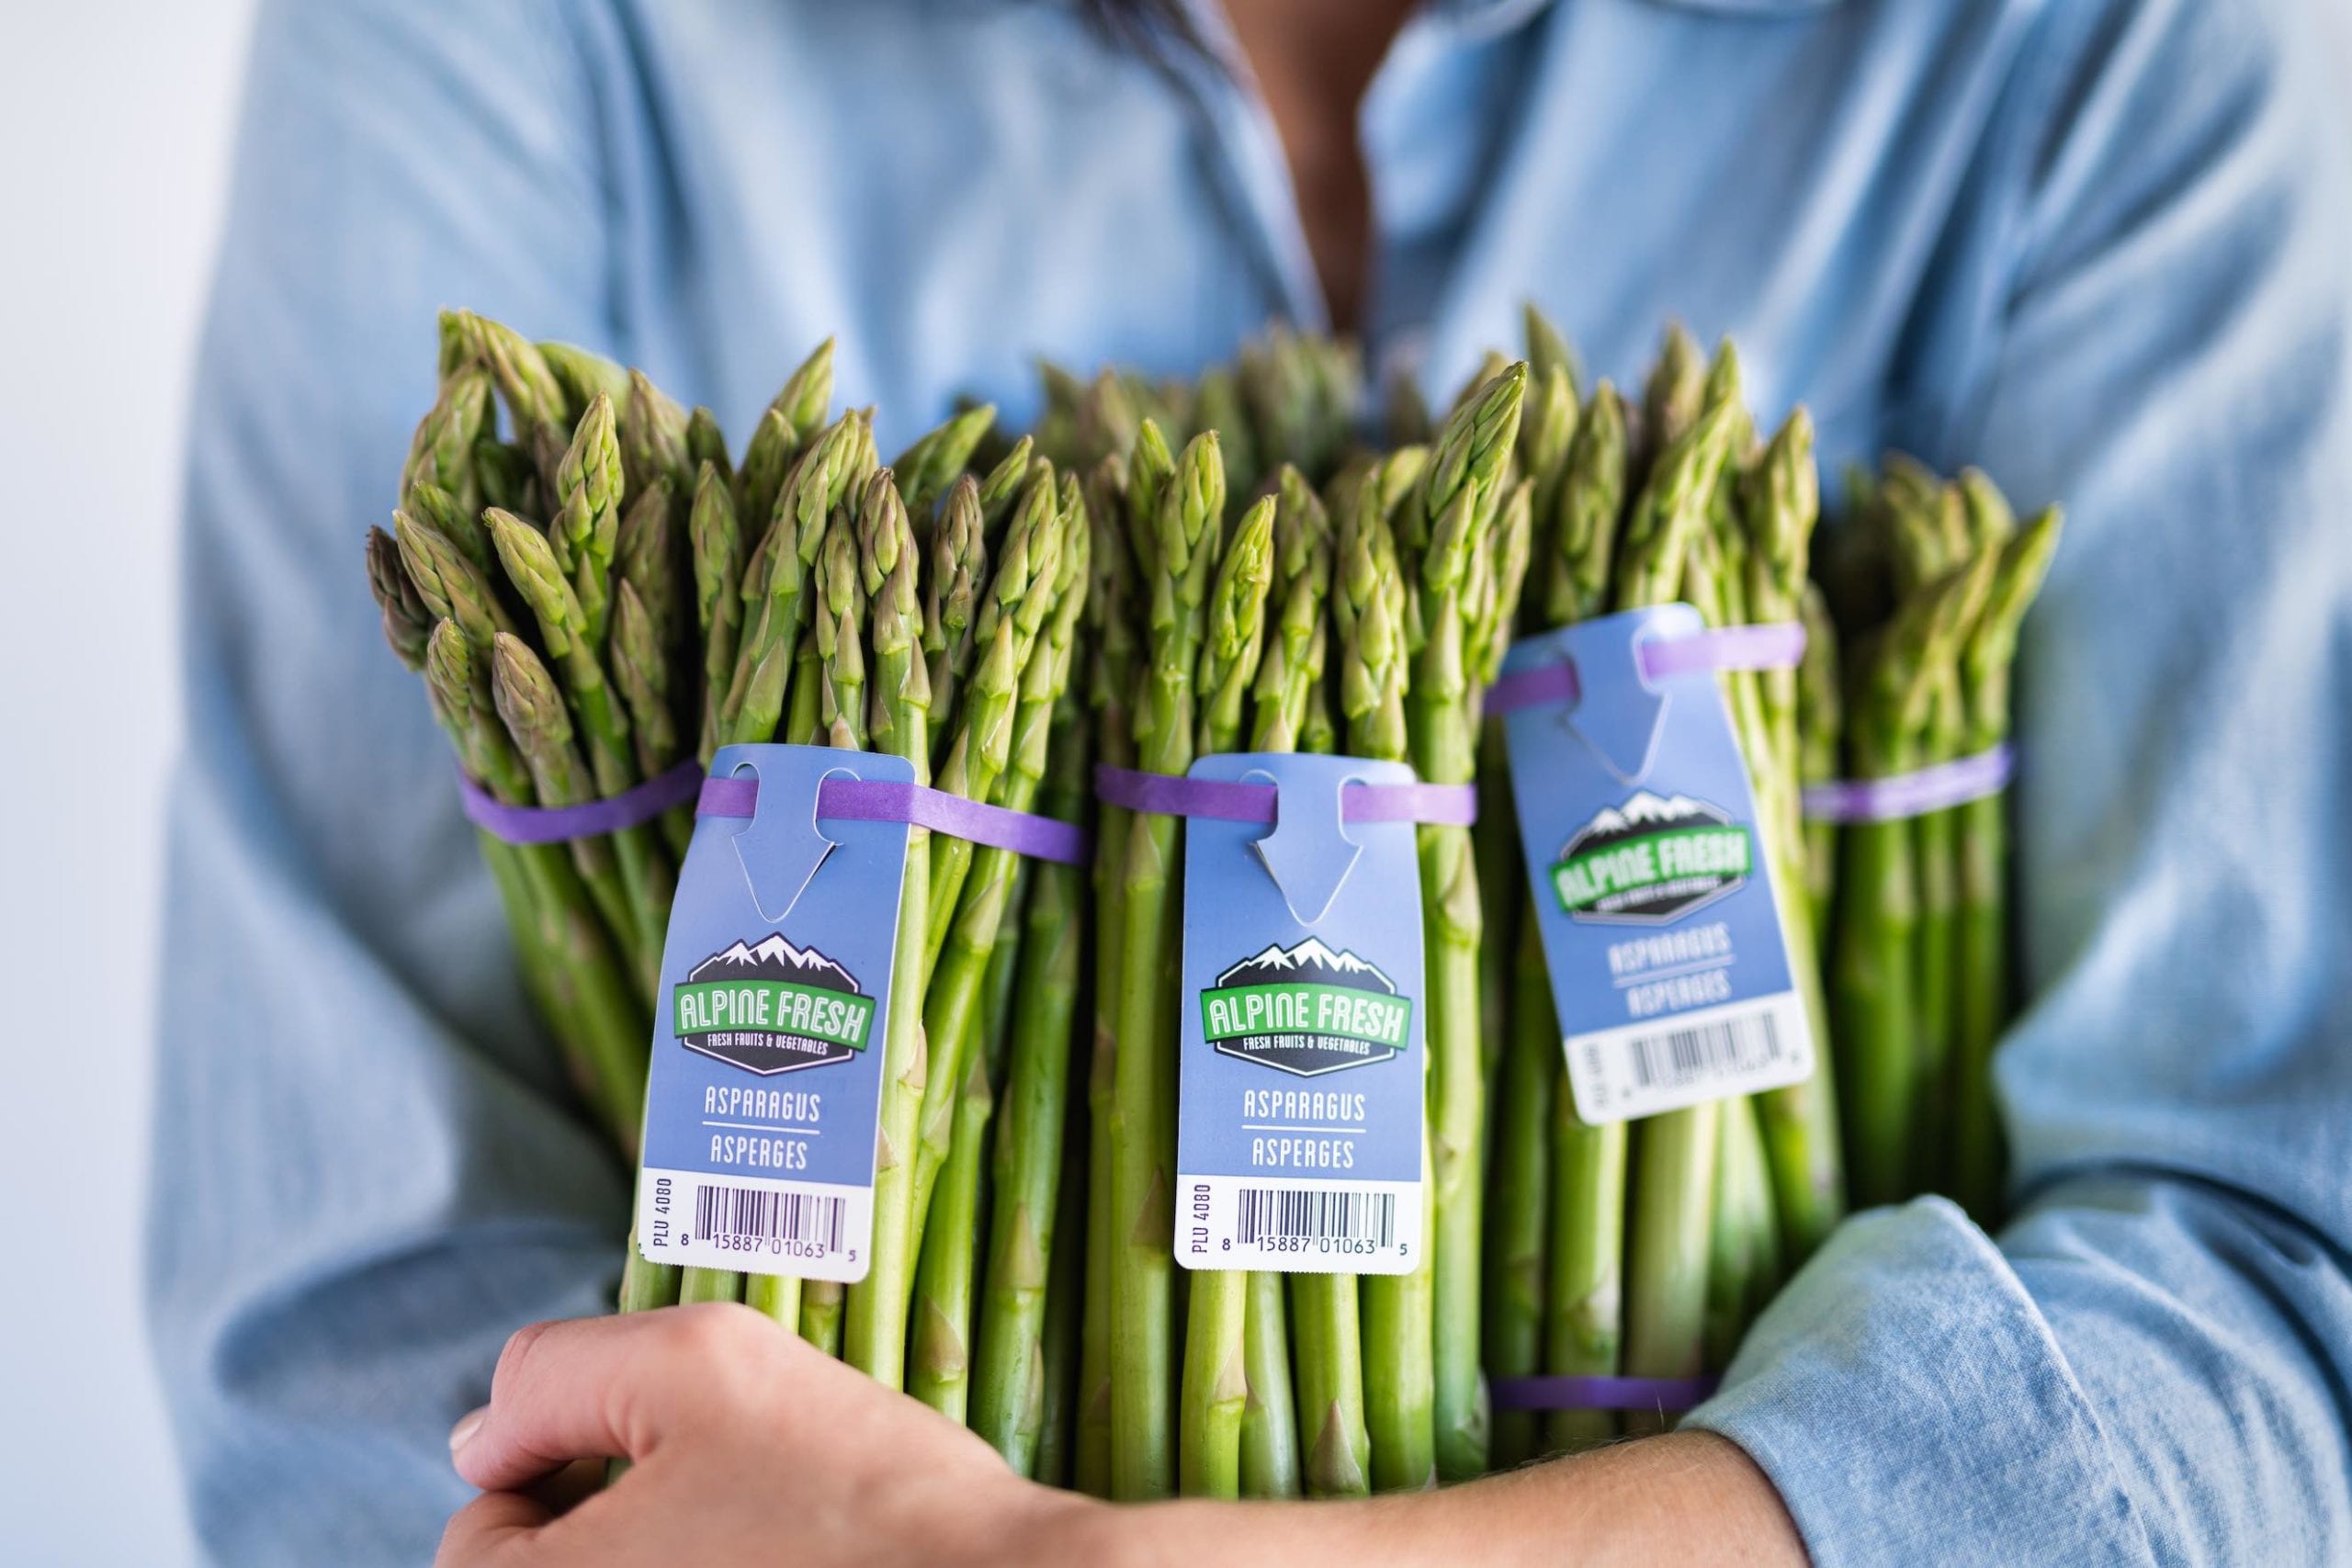 Closeup of bunches of asparagus held by someone wearing a blue jean shirt